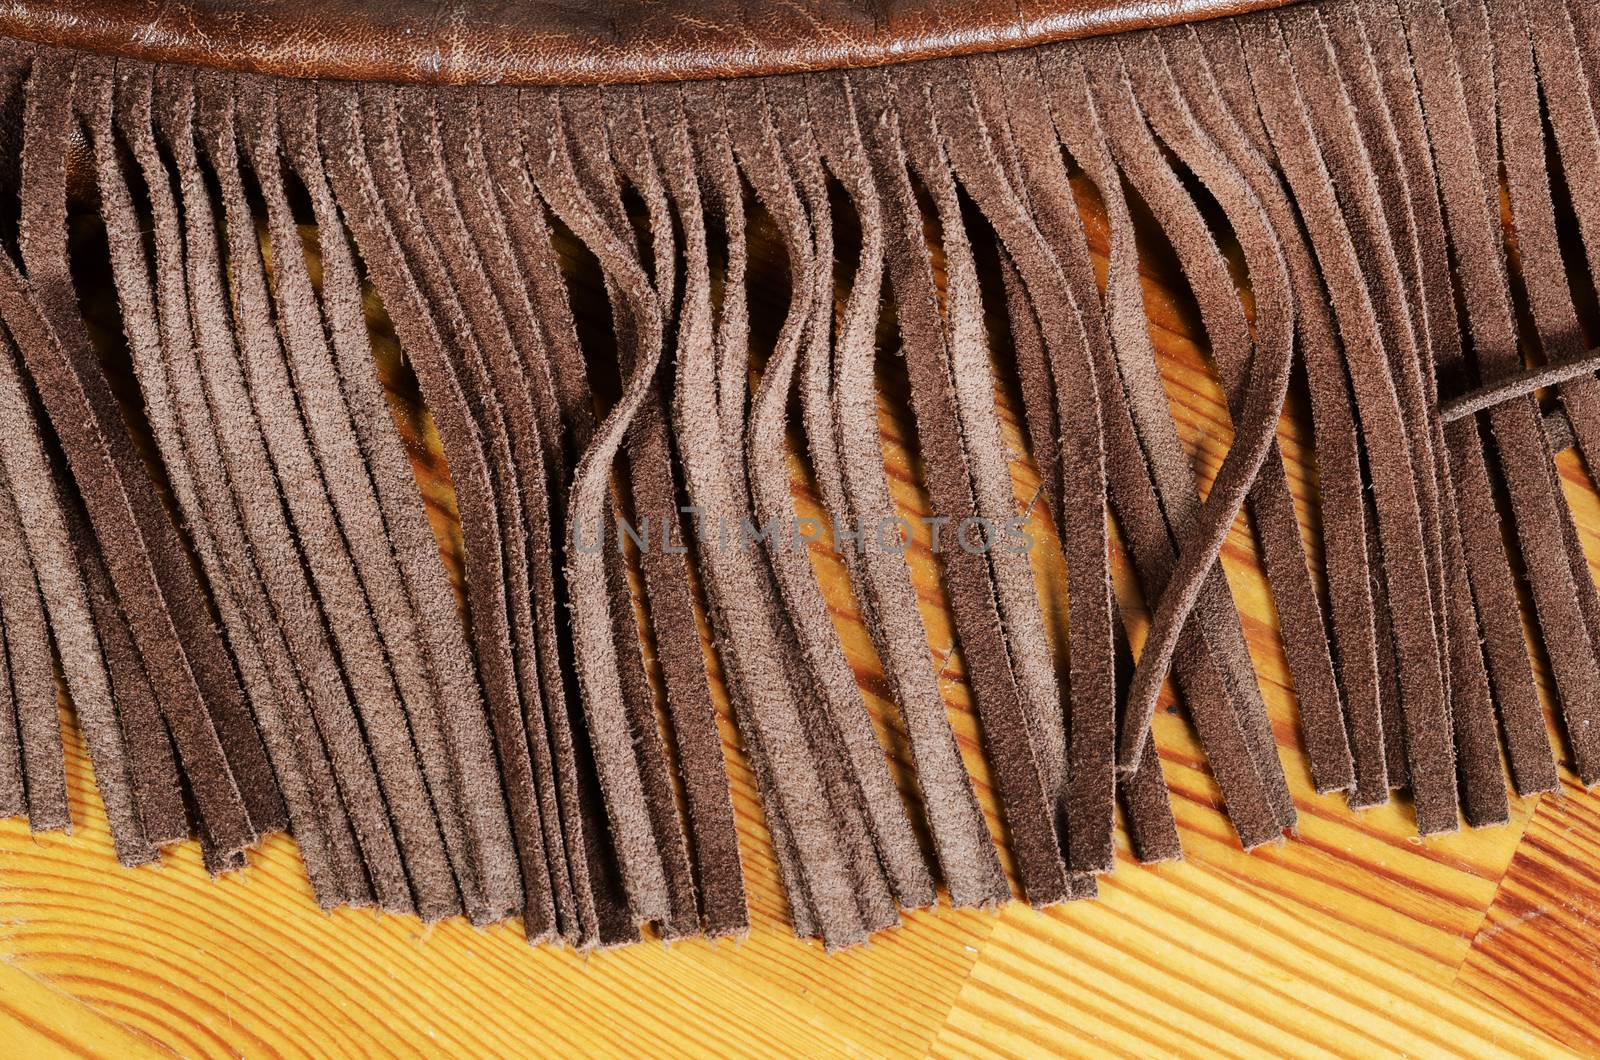 leather bag detail by sarkao